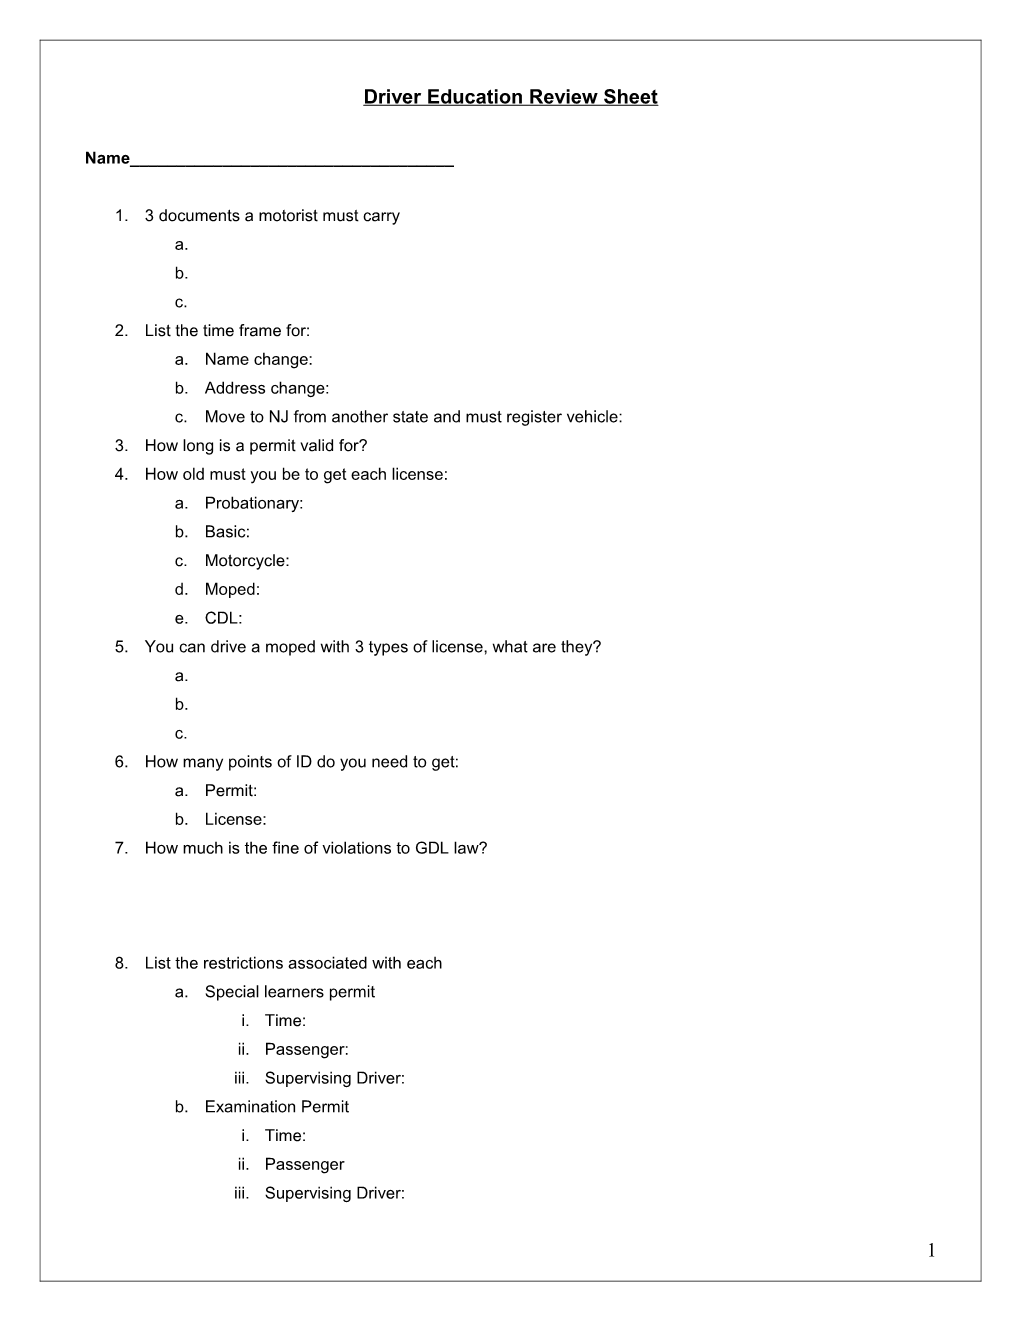 Driver Education Review Sheet